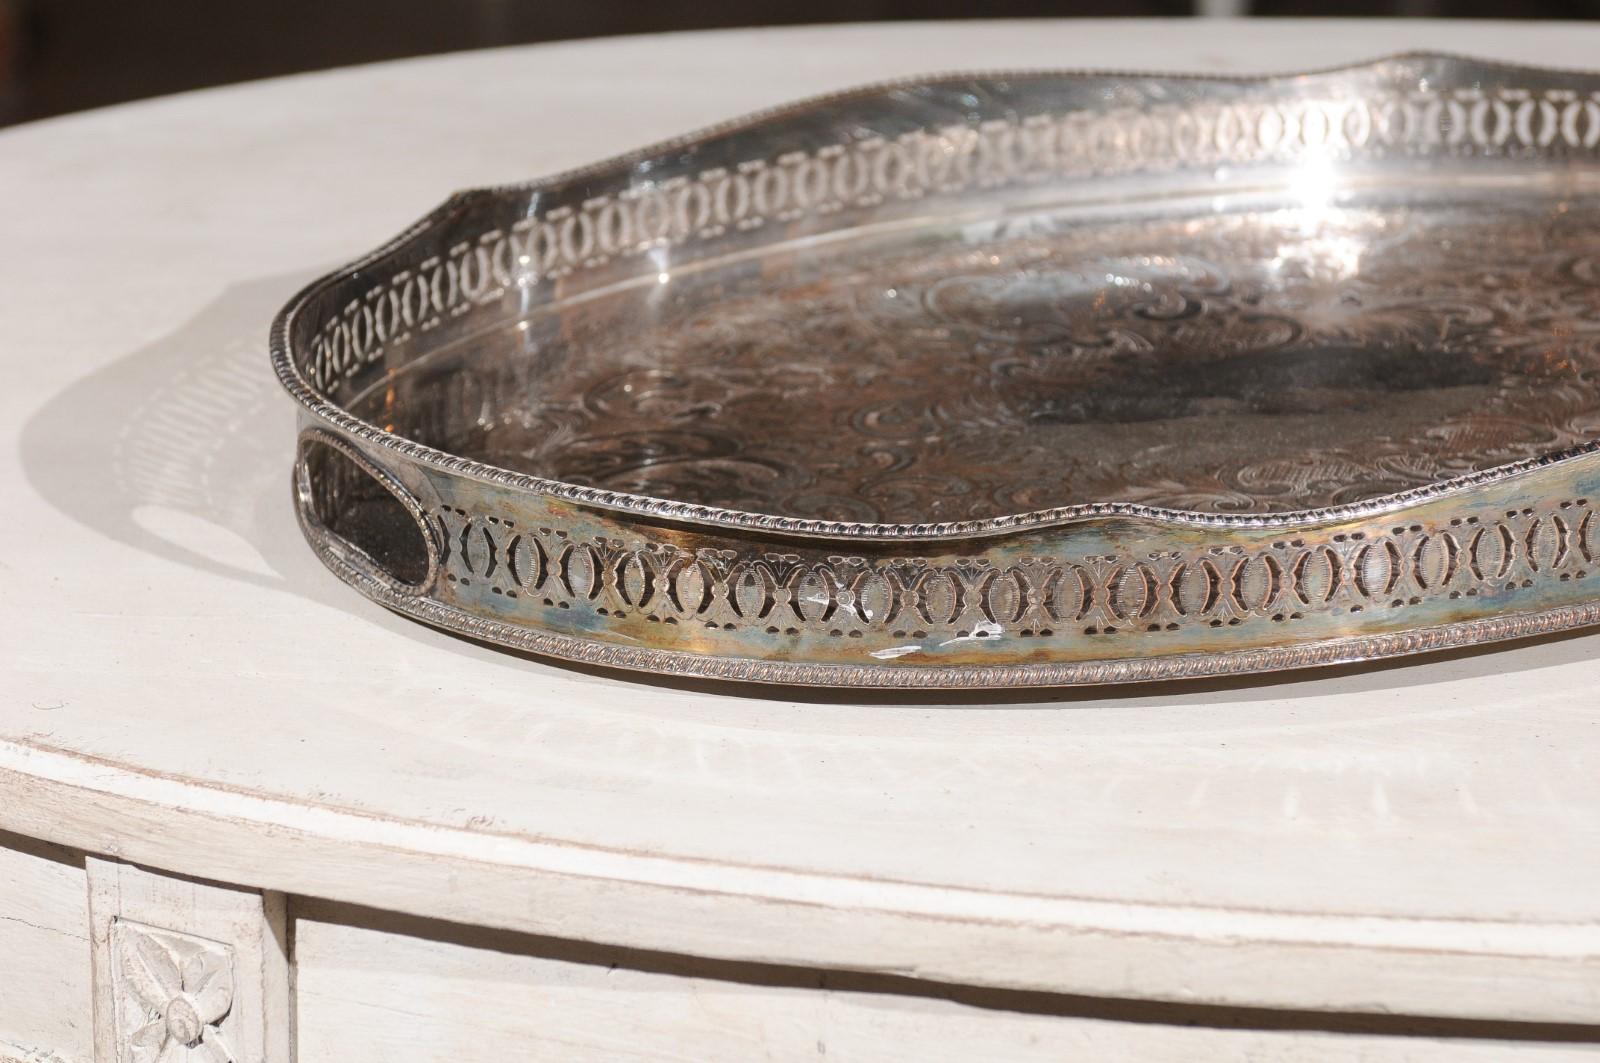 English Edwardian Period Silver Plated Tray with Pierced Motifs and C-Scrolls For Sale 3